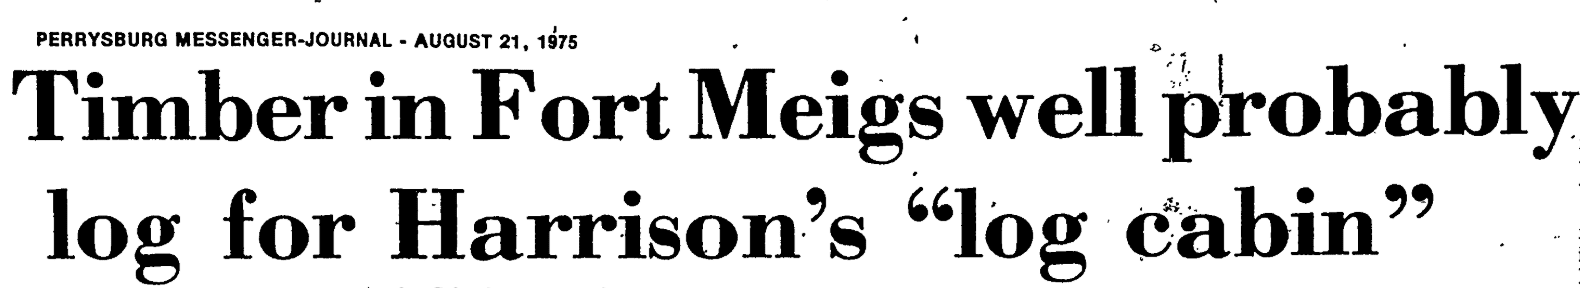 Newspaper headline in the Perrysburg-Messenger Journal declaring the discovery of the Locofoco-thrown log into the well at Fort Meigs